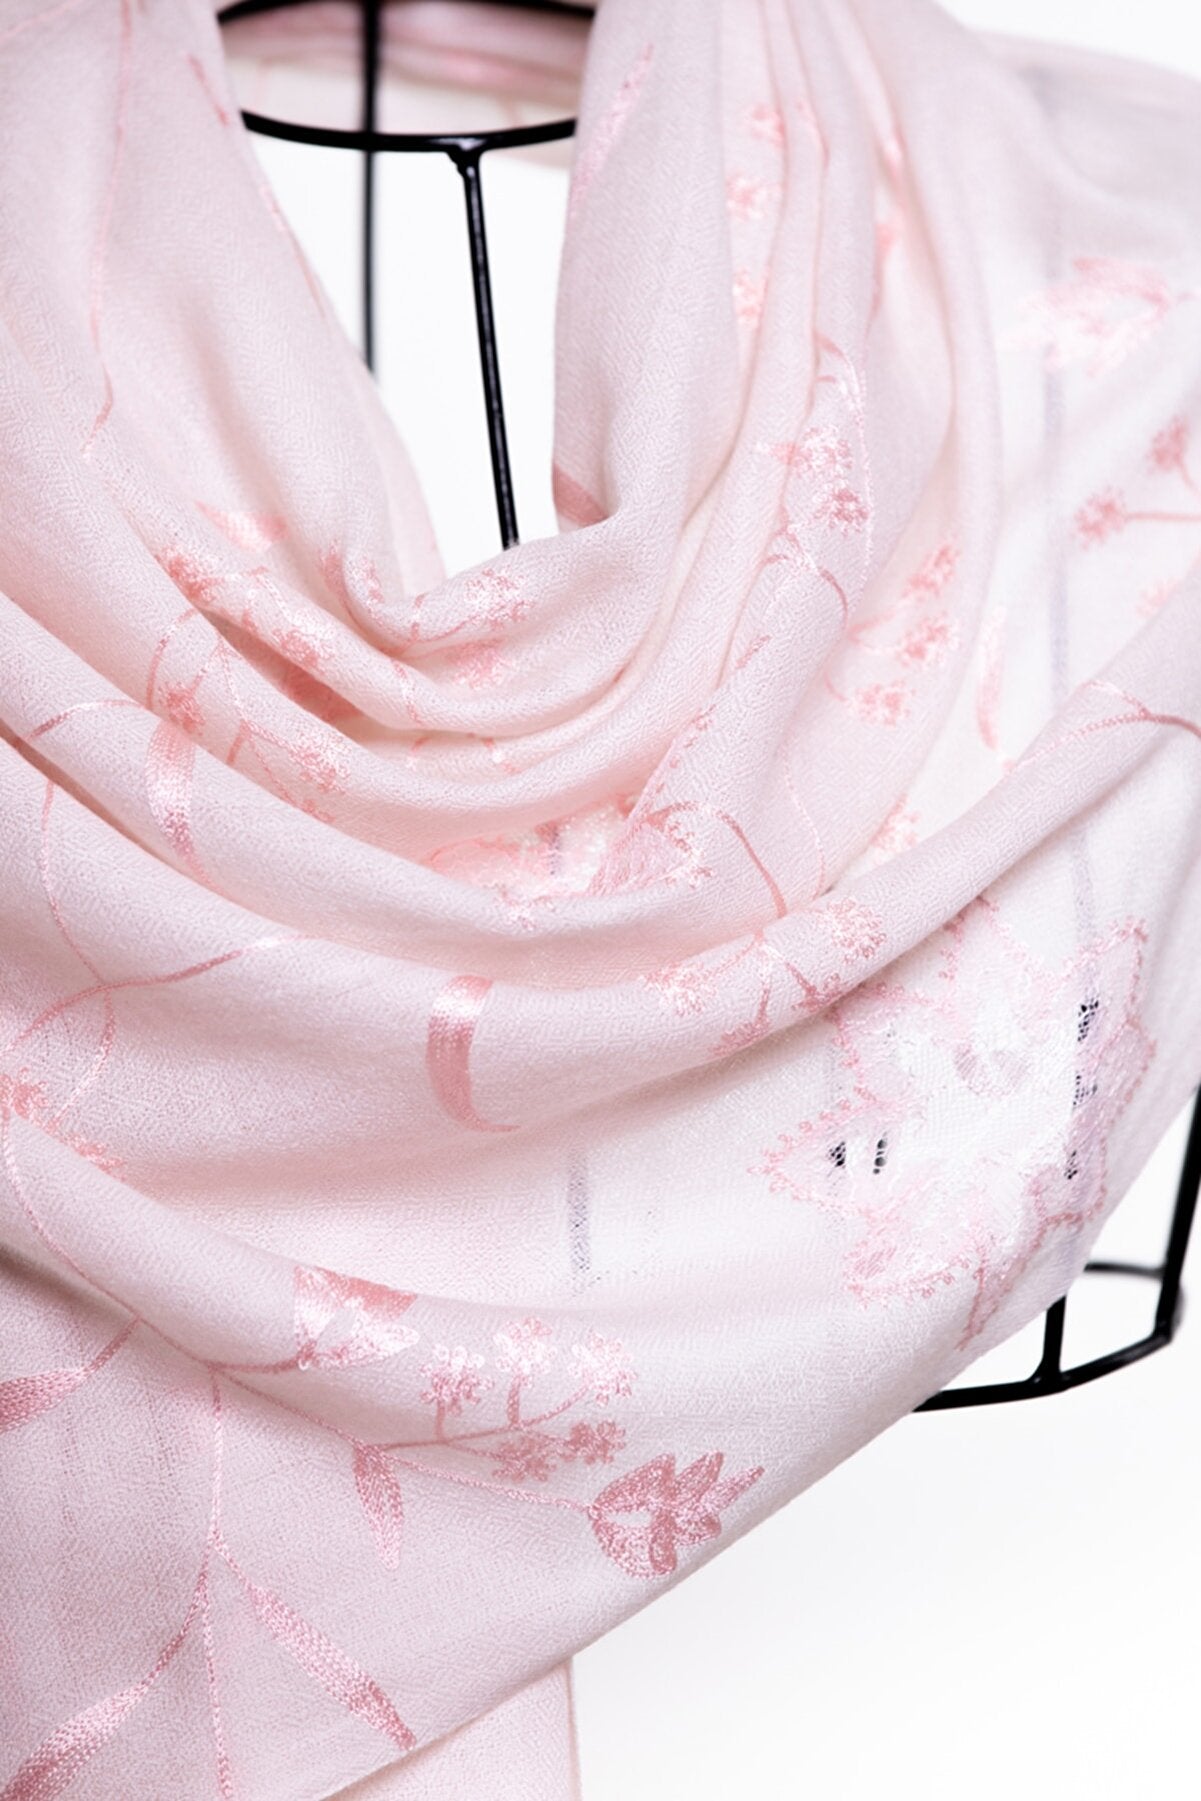 Lace & Embroidery Floral Sheer Shawl - Baby Pink